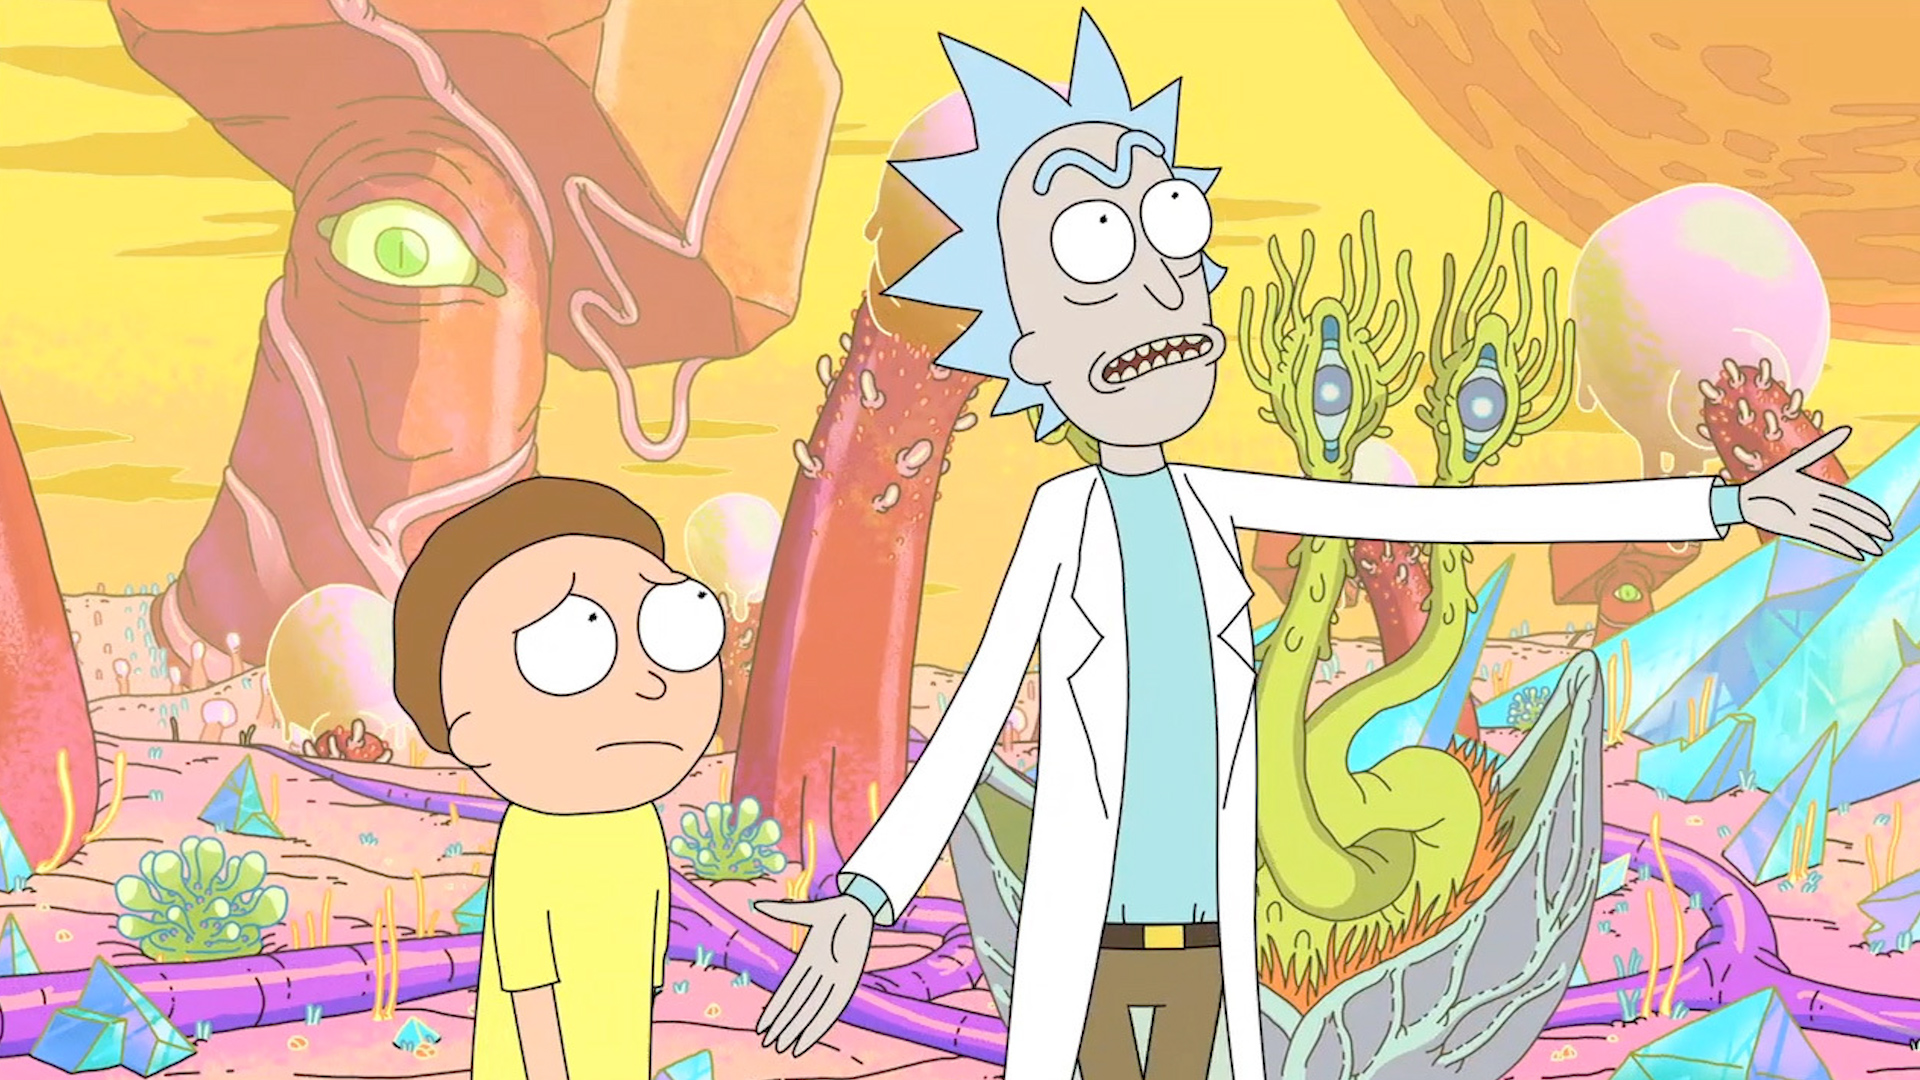 Obsidian once had plans to create a Rick and Morty game